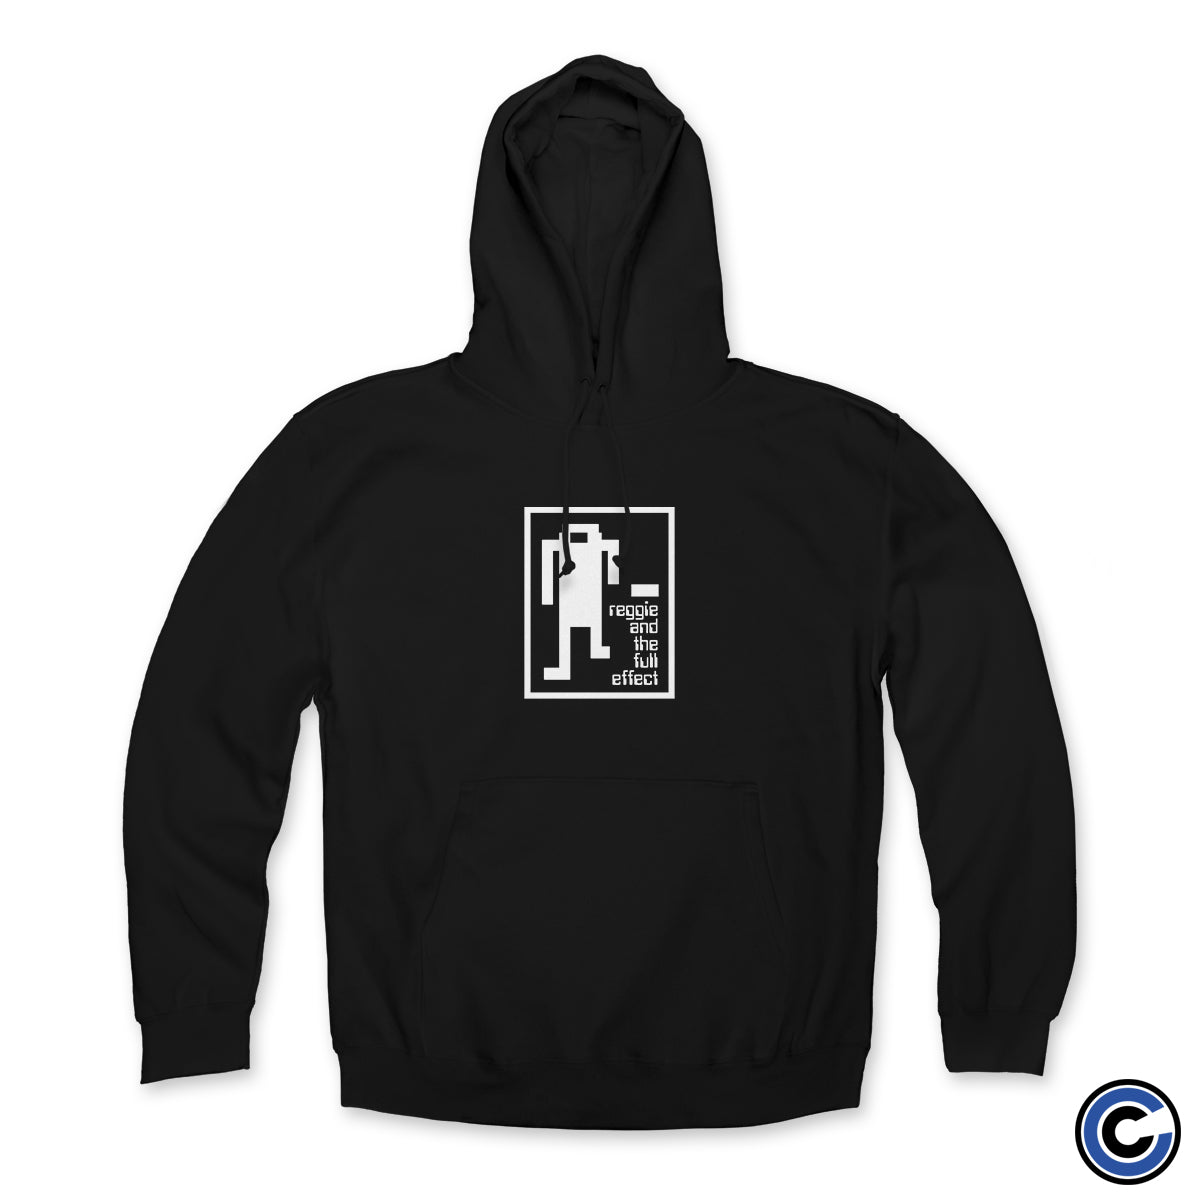 Reggie and the Full Effect "Robot" Hoodie